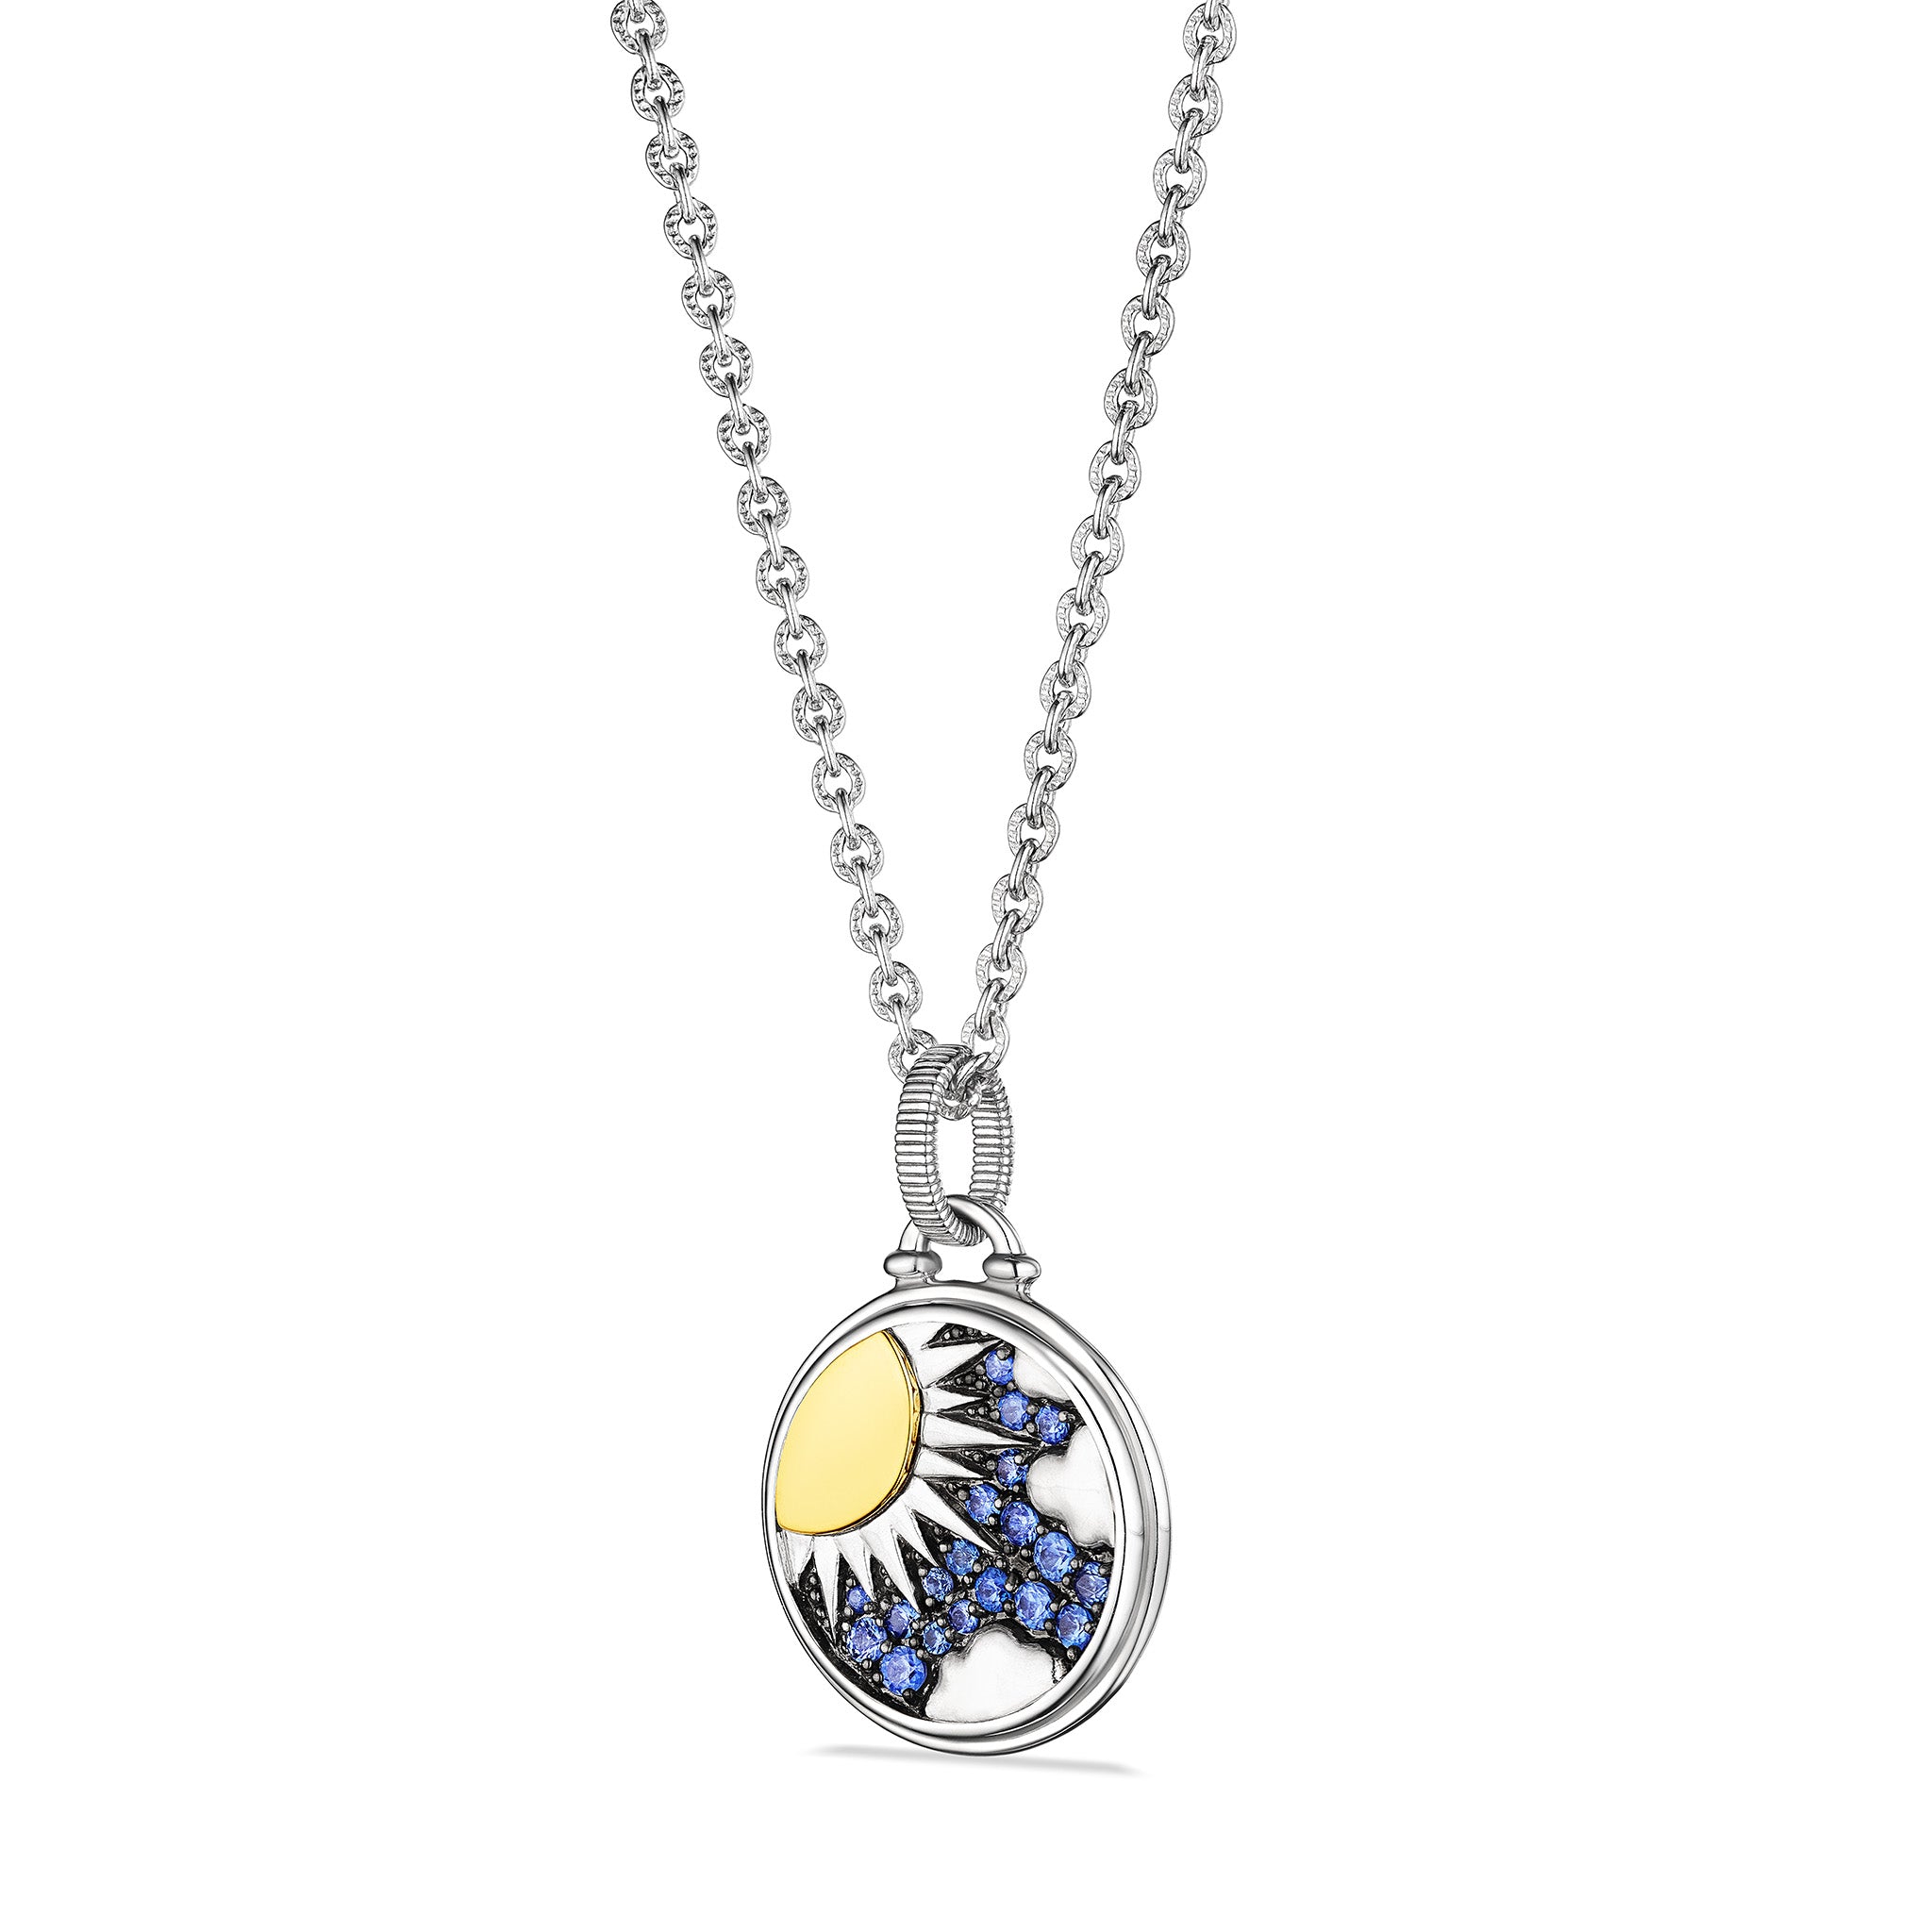 Little Luxuries Sunshine Medallion Necklace with Blue Sapphire, Diamonds and 18K Gold